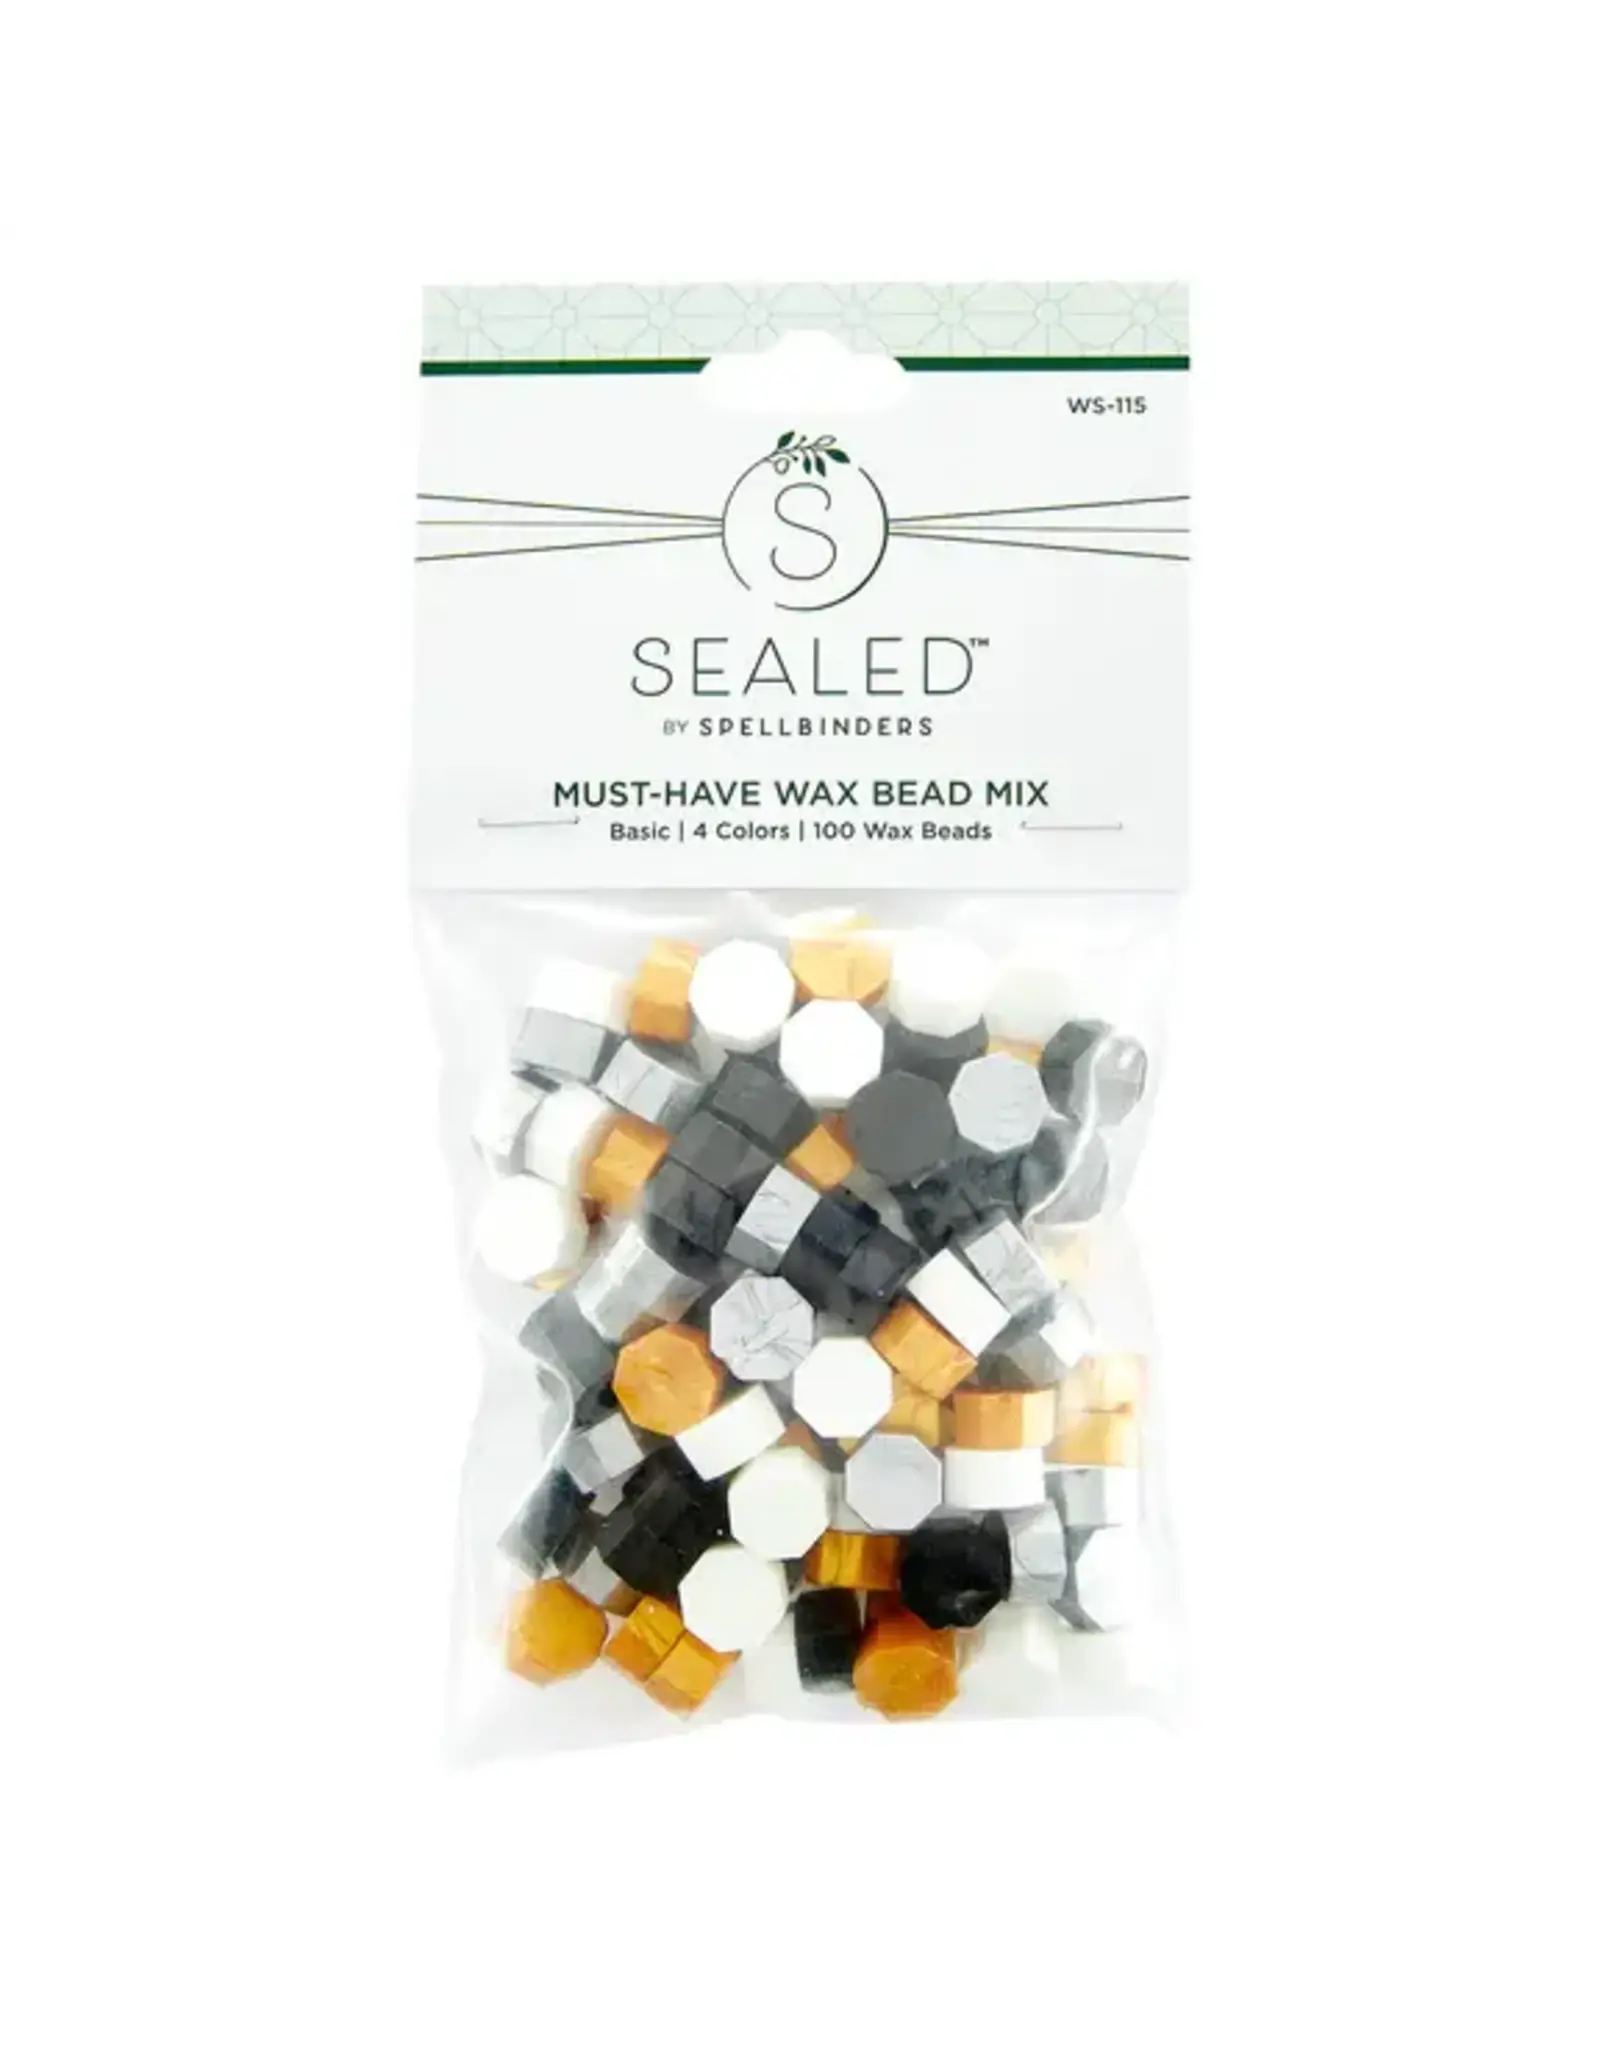 SPELLBINDERS SPELLBINDERS SEALED BY SPELLBINDERS COLLECTION BASIC MUST-HAVE WAX BEAD MIX 100/PK